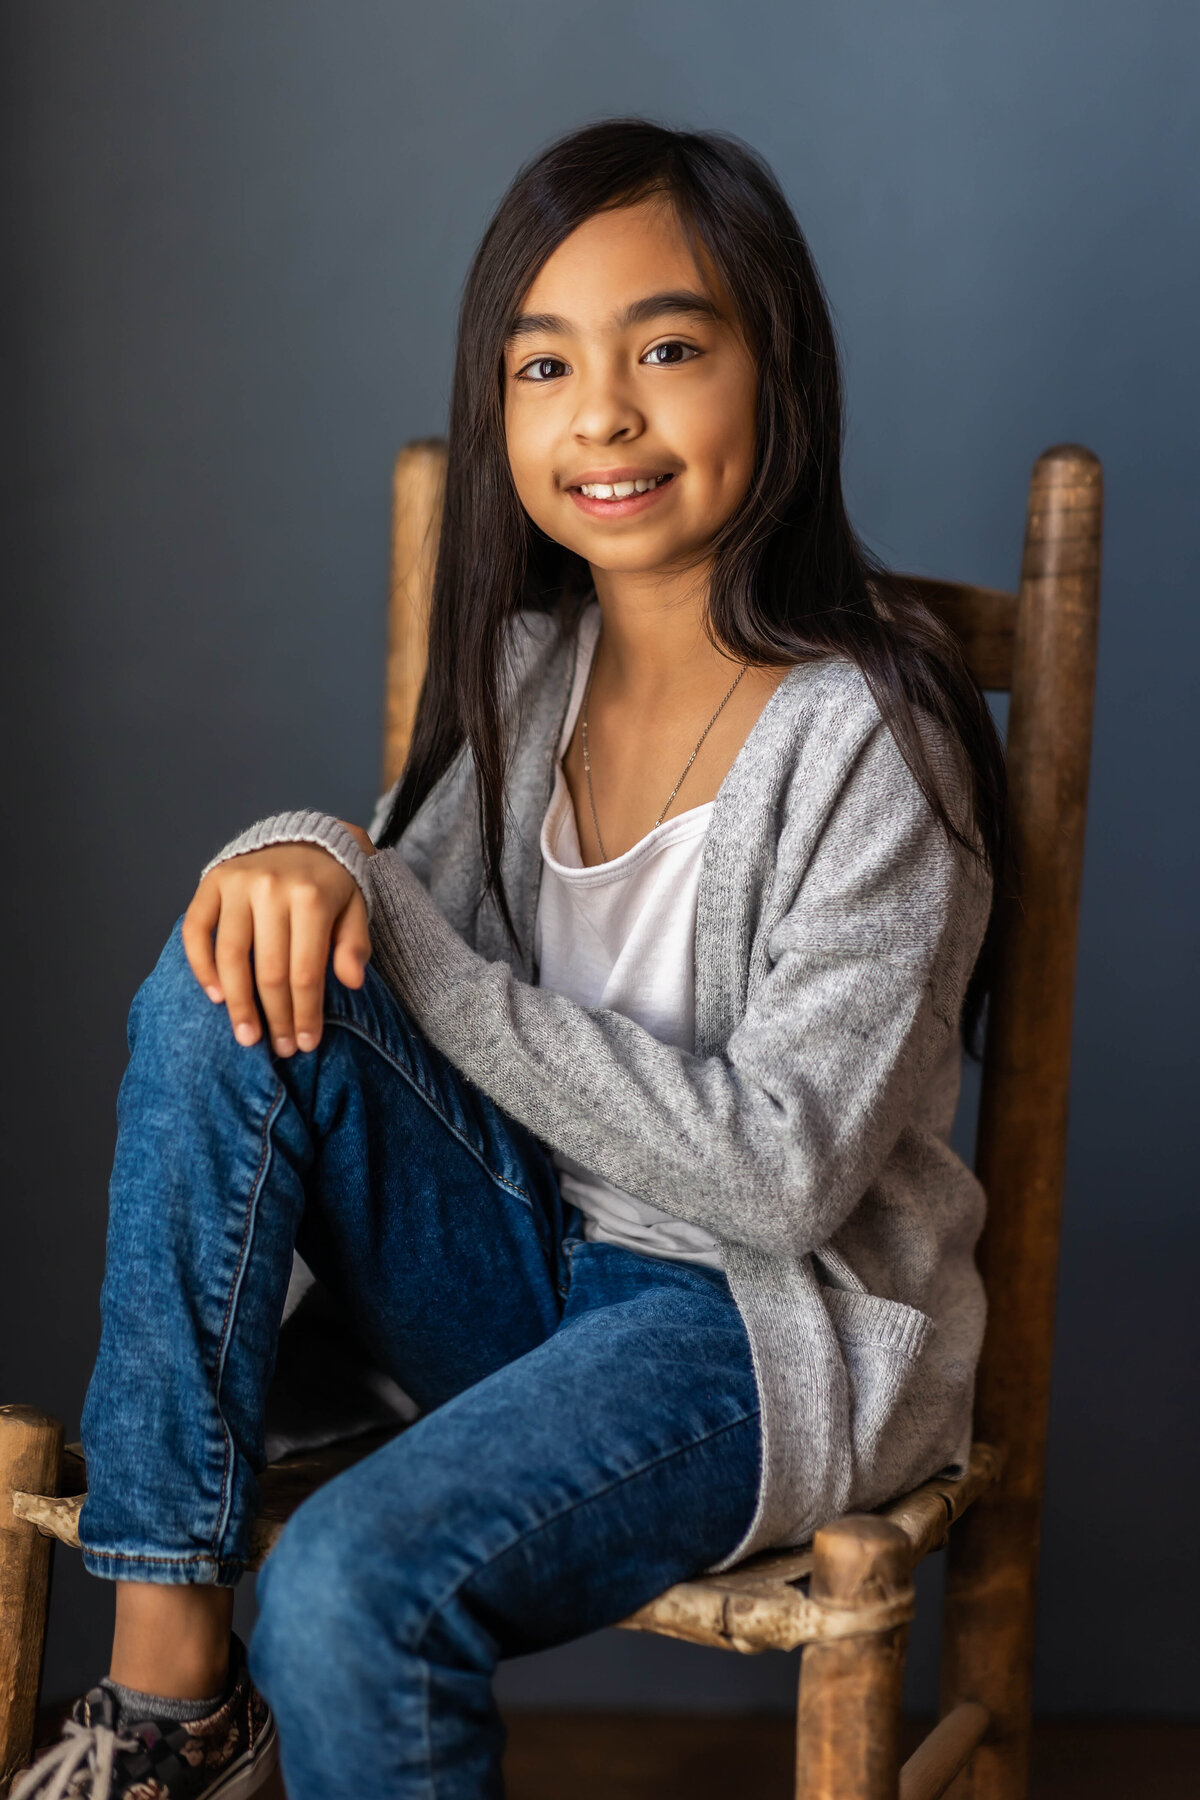 Young girl is wearing a gray sweater with white tshirt and jeans and is seated and smiling at the camera at an indoor session